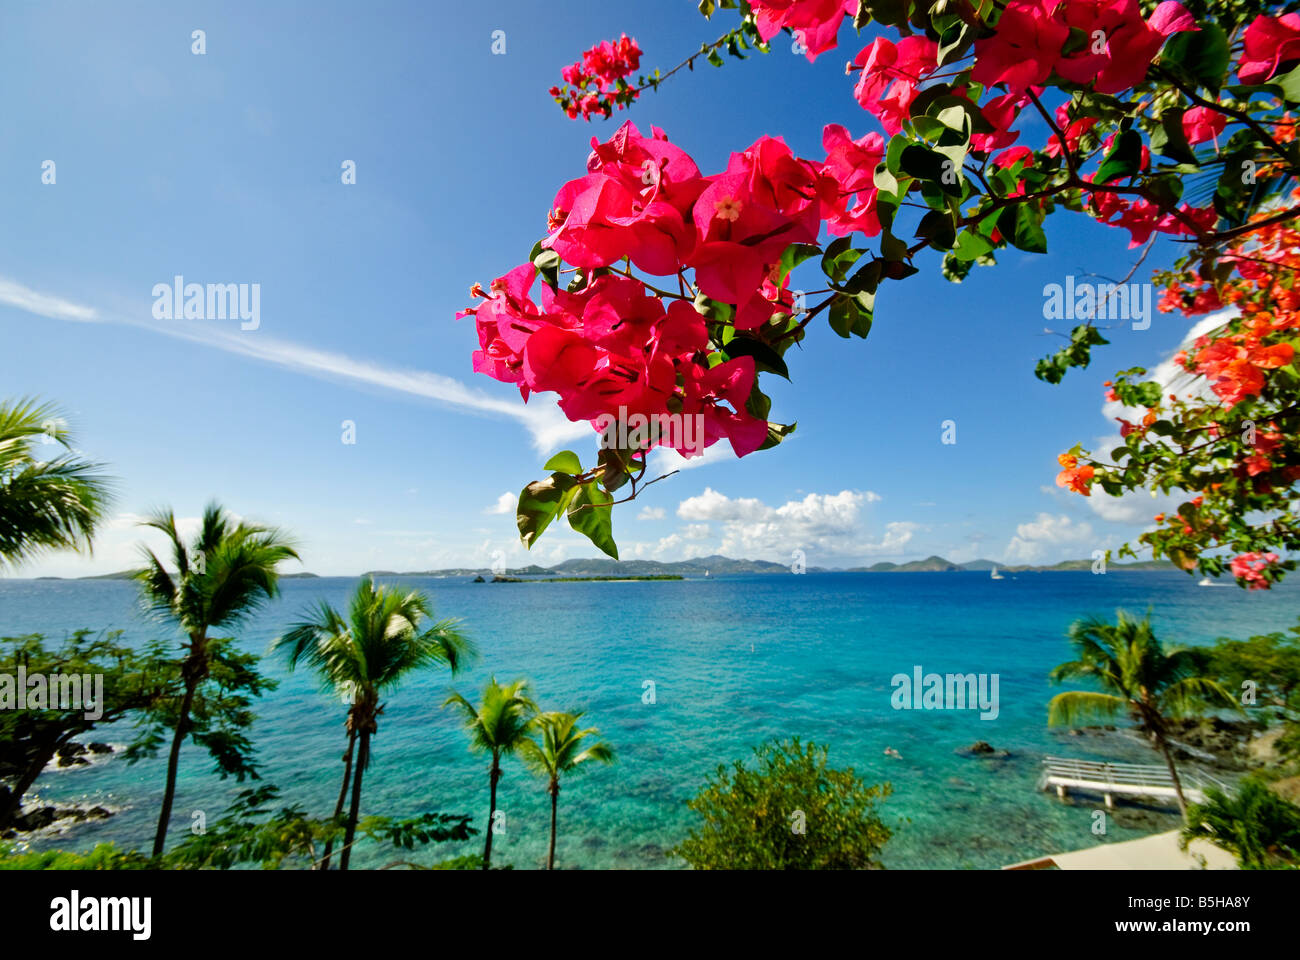 ST JOHN, US Virgin Islands - A view out over clear Caribbean waters looking toward St Thomas from St John in the US Virgin Islands, with tropical pink flowers at right. Stock Photo